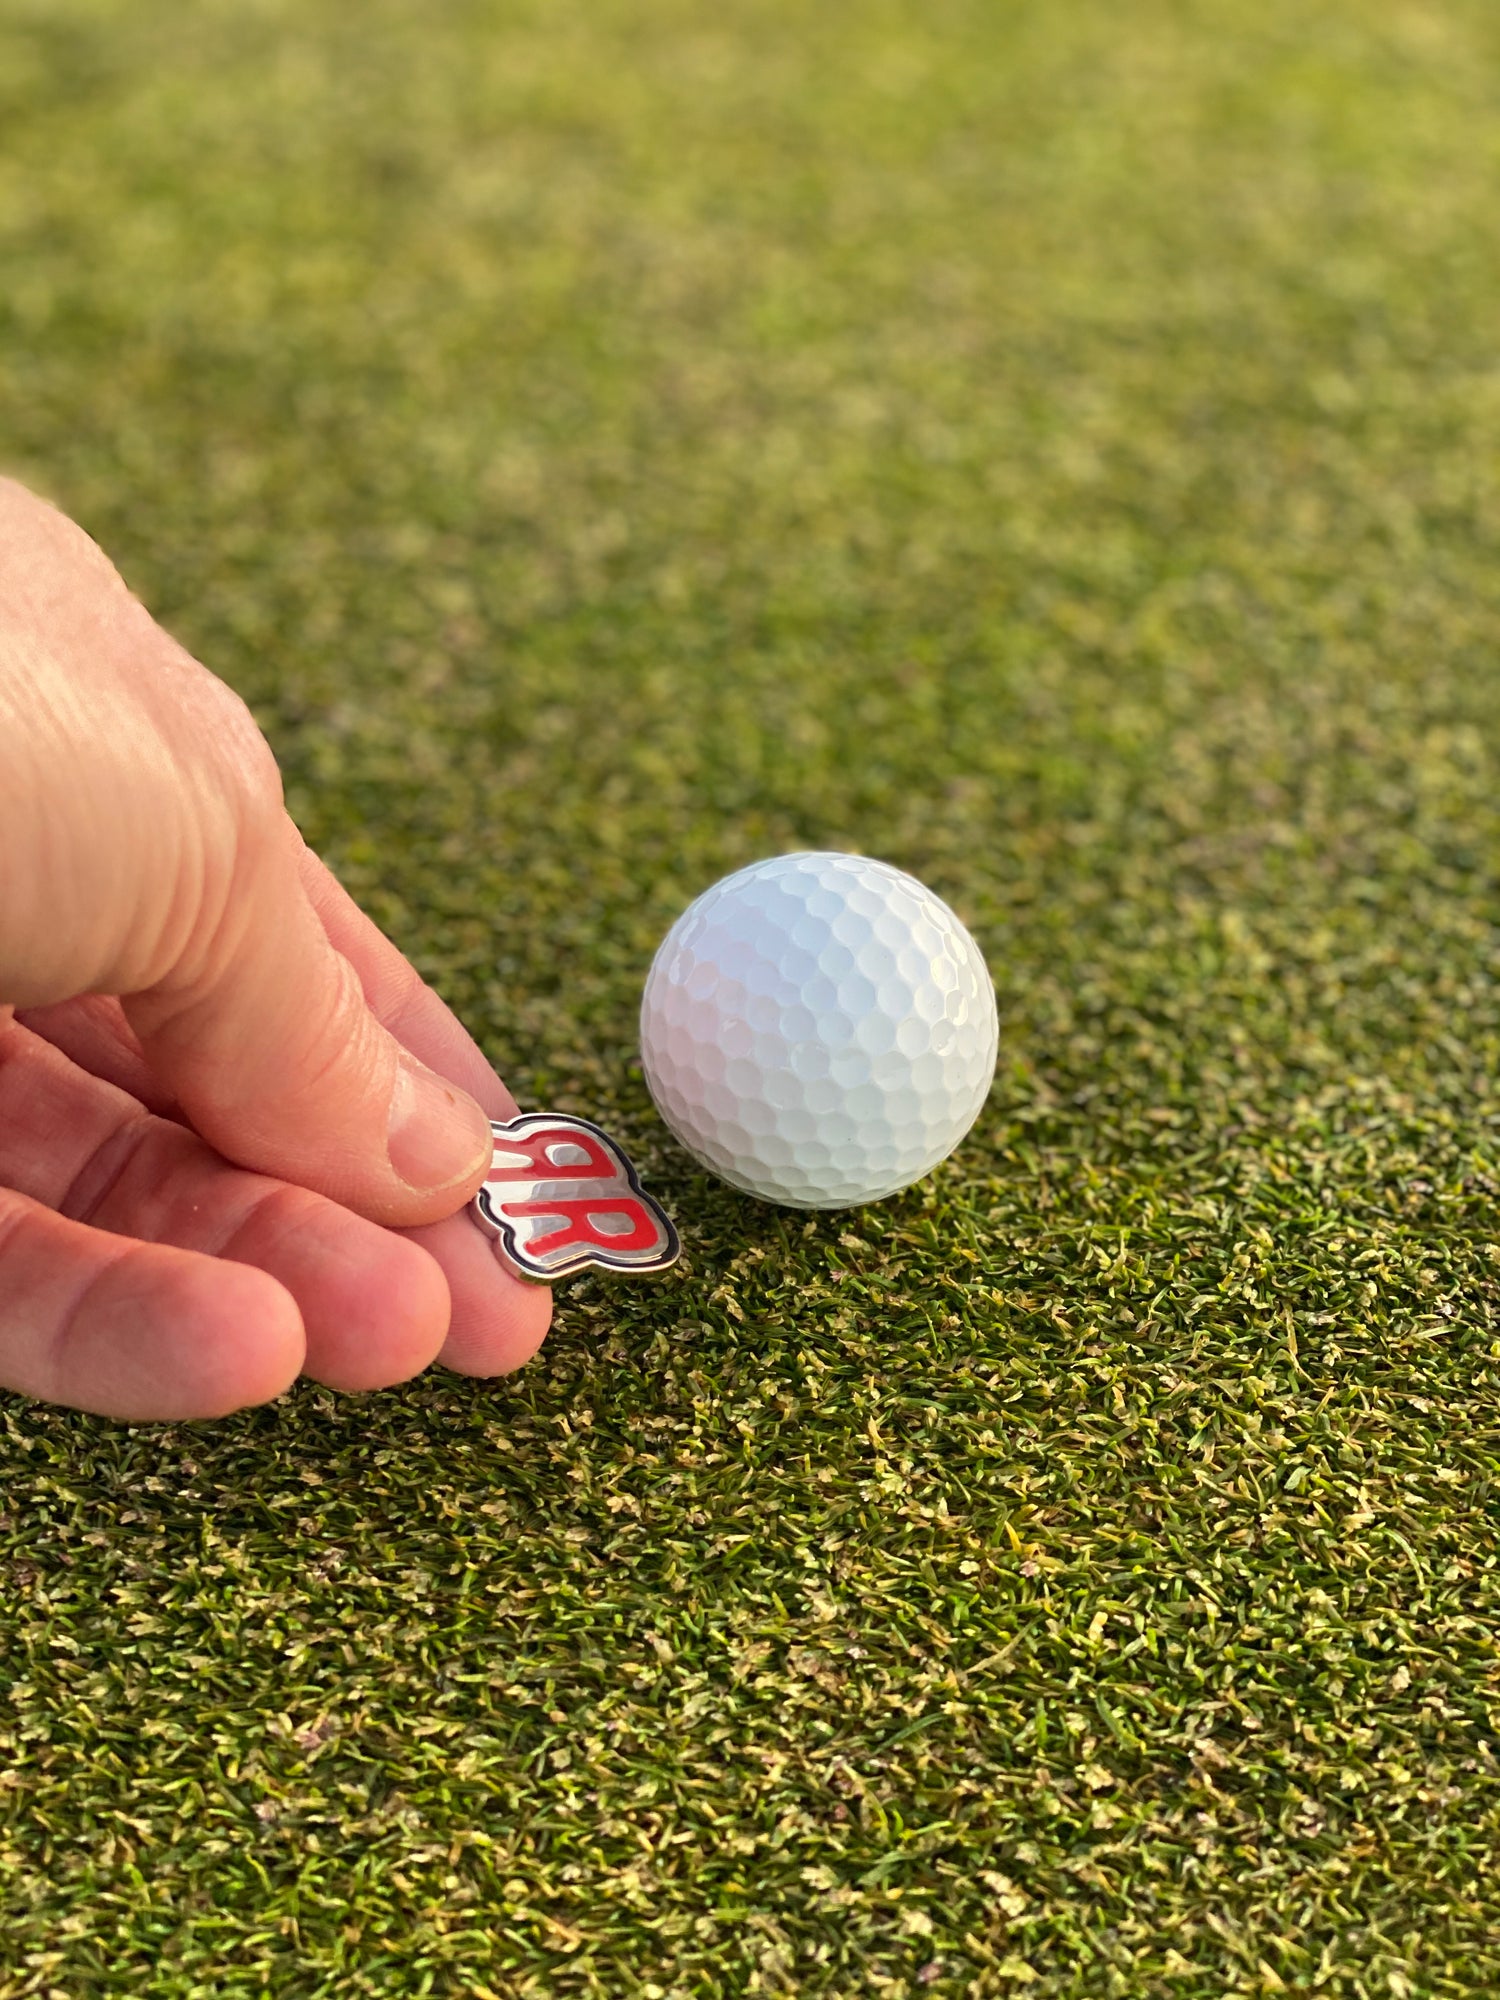 The Mirror ball marker placed with golf ball